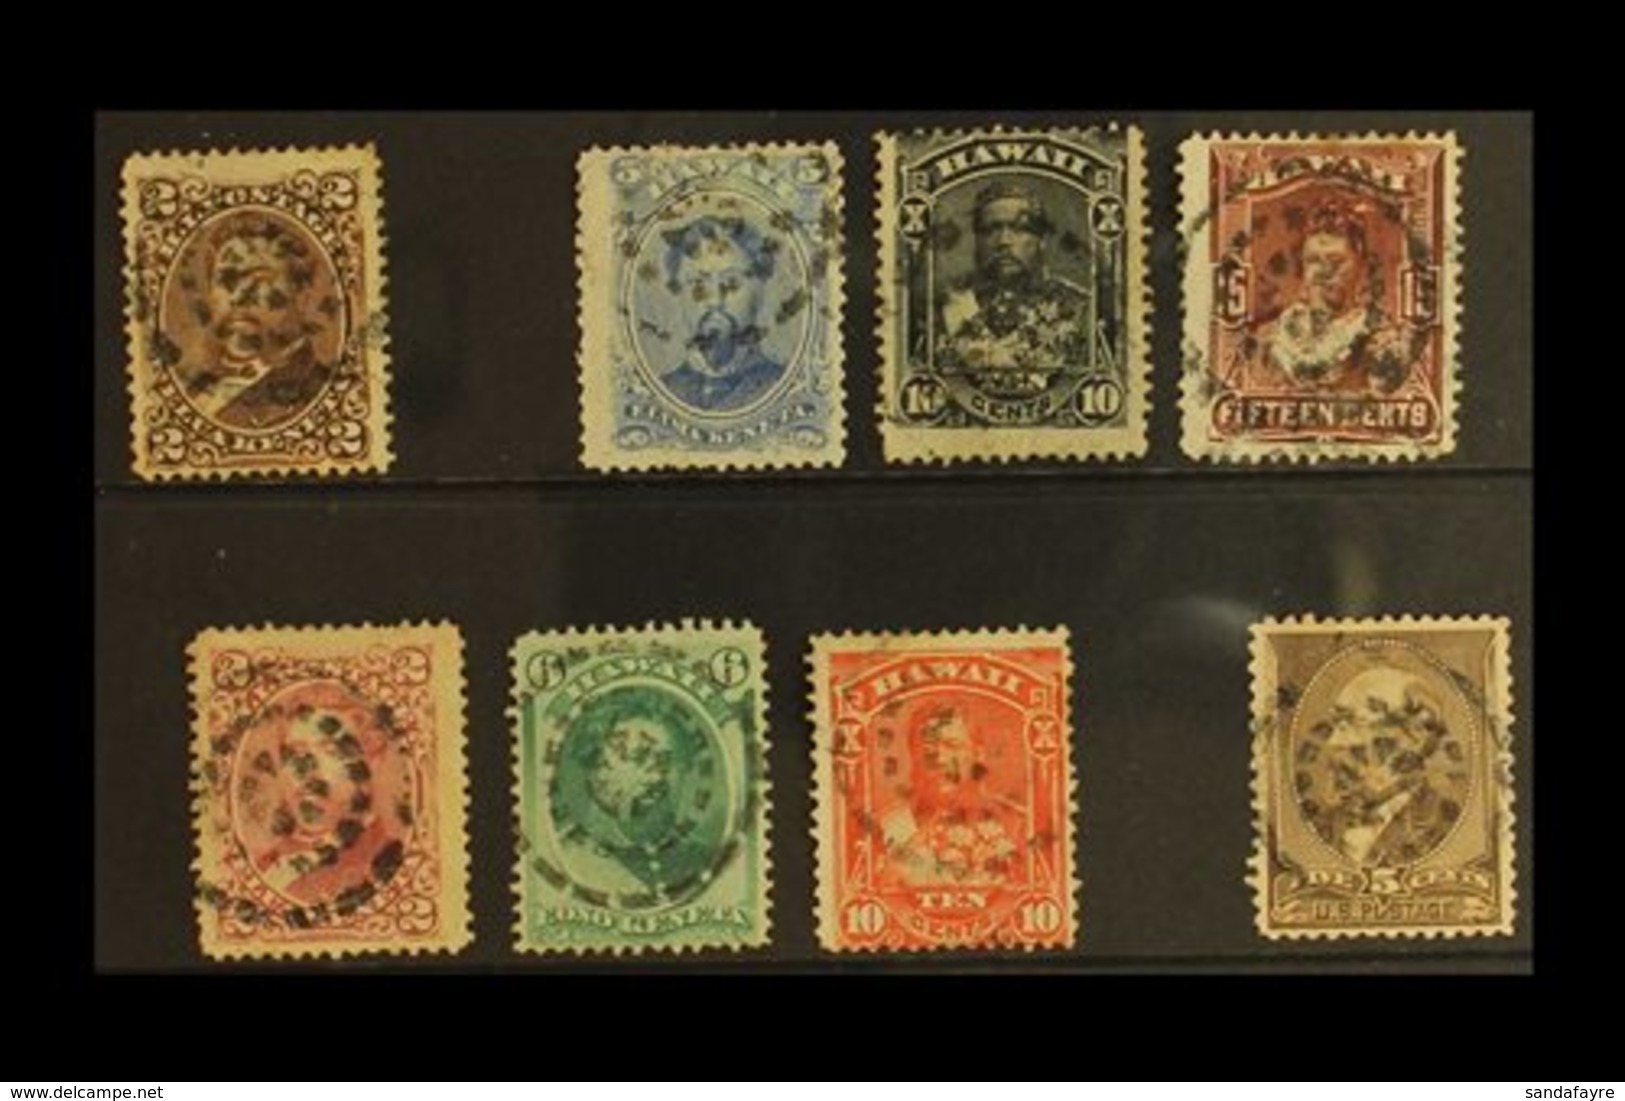 POSTMARKS  DISTINCTIVE TARGET STYLE CANCEL On Range Of 1875-86 Issues, All Different With Values To 15c, Plus USA 1882 5 - Hawai